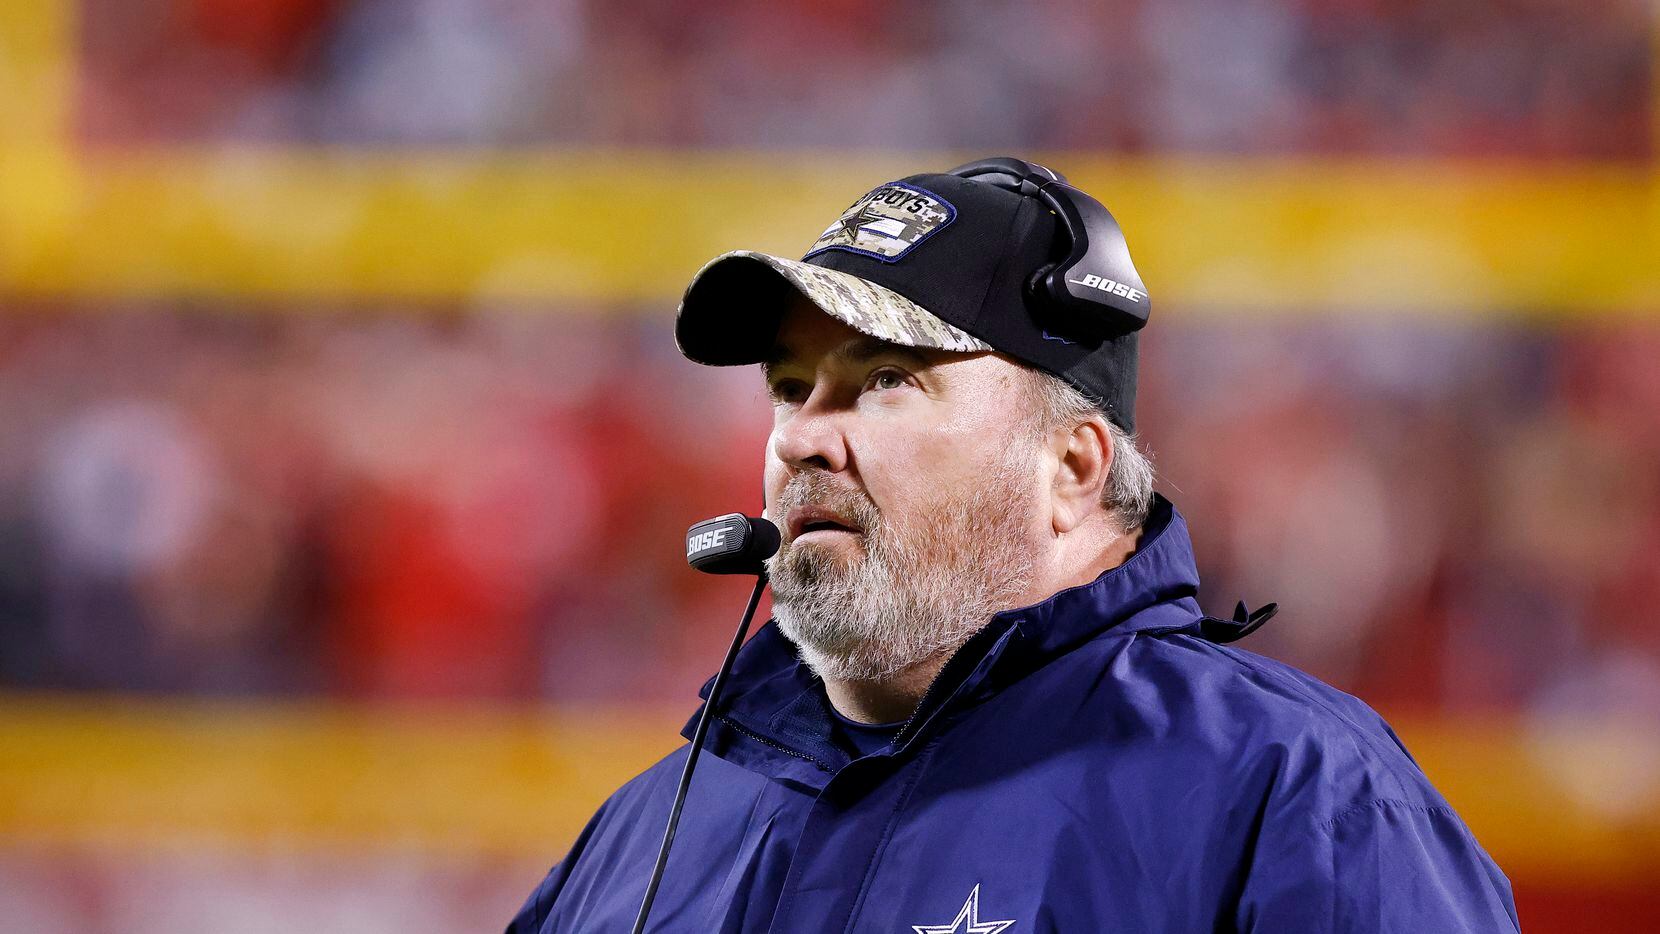 Dallas Cowboys head coach Mike McCarthy looks to the video board for a replay after the defense made a fourth quarter stop against Kansas City Chiefs at Arrowhead Stadium in Kansas City, Missouri, November 21, 2021. The Cowboys lost, 19-9.